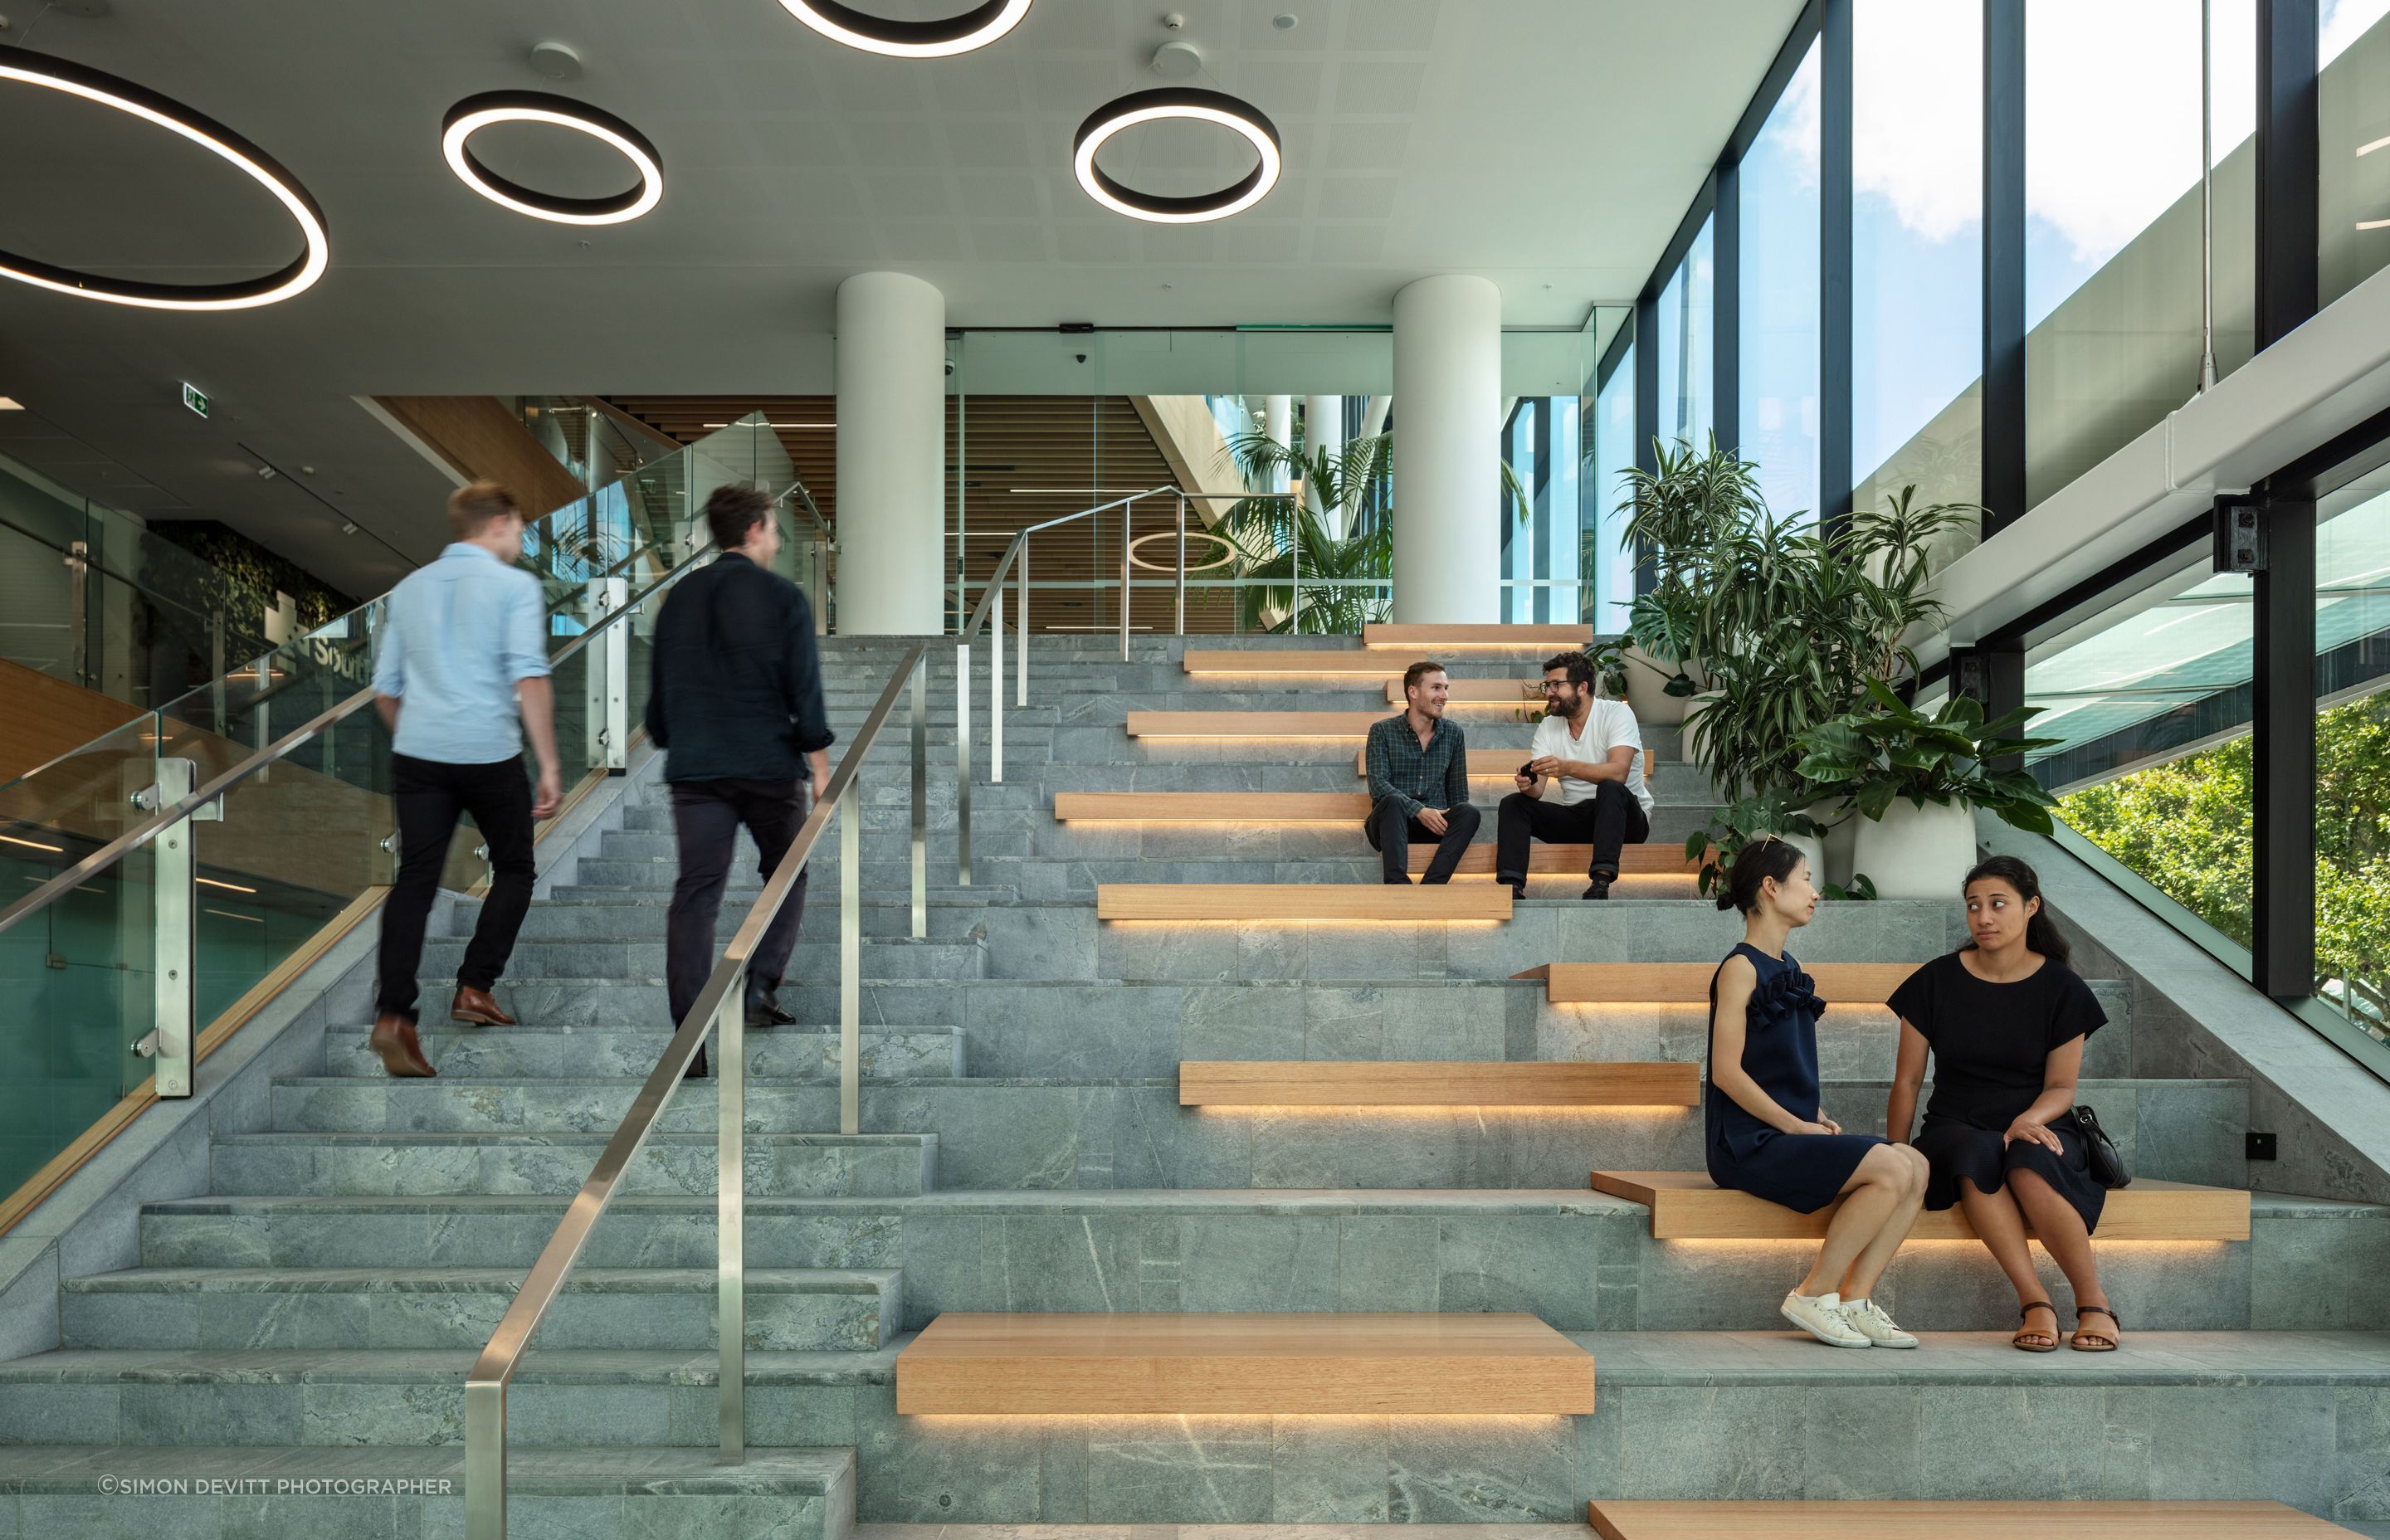 In keeping with the brief to create a series of open, collaborative spaces, the lobby stairs also act as an informal meeting space.